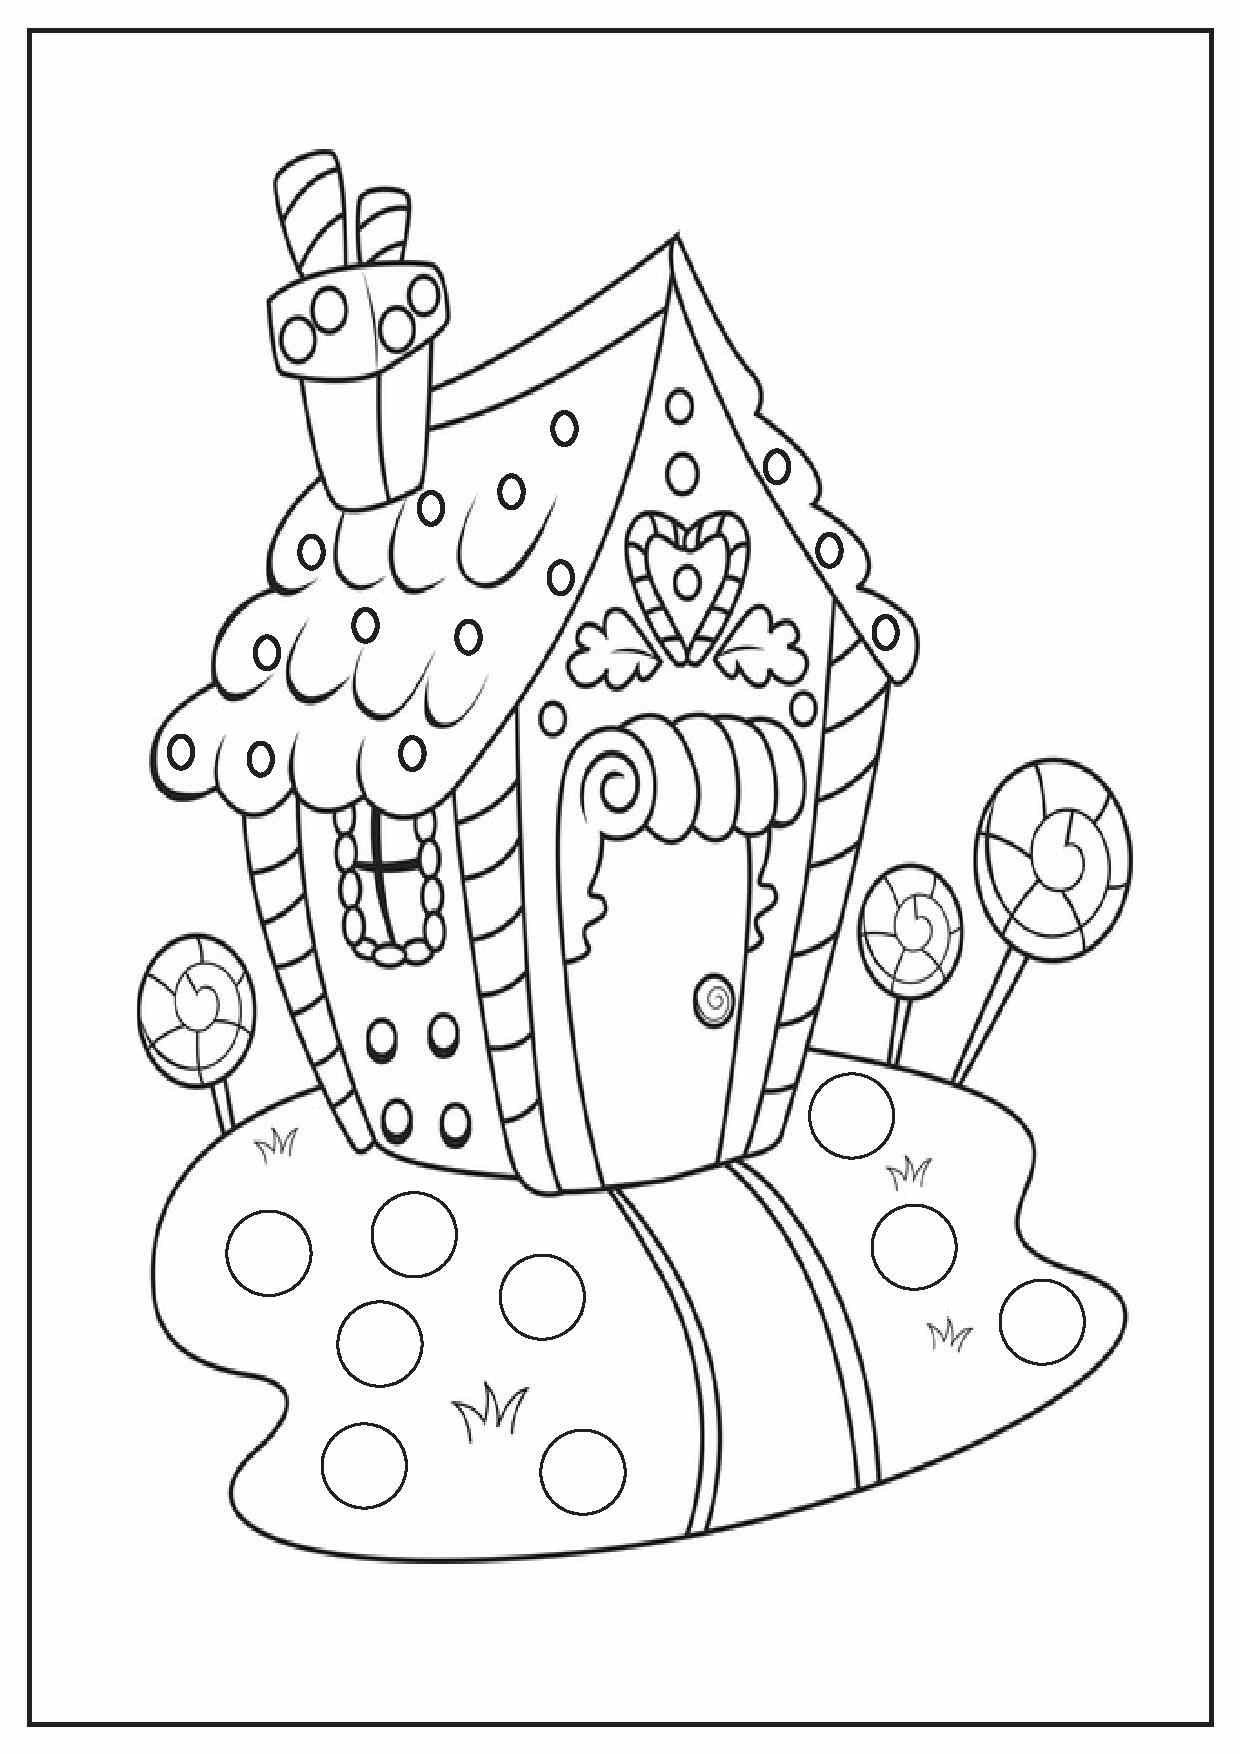 Christmas Coloring Pages Home - Coloring Pages For All Ages